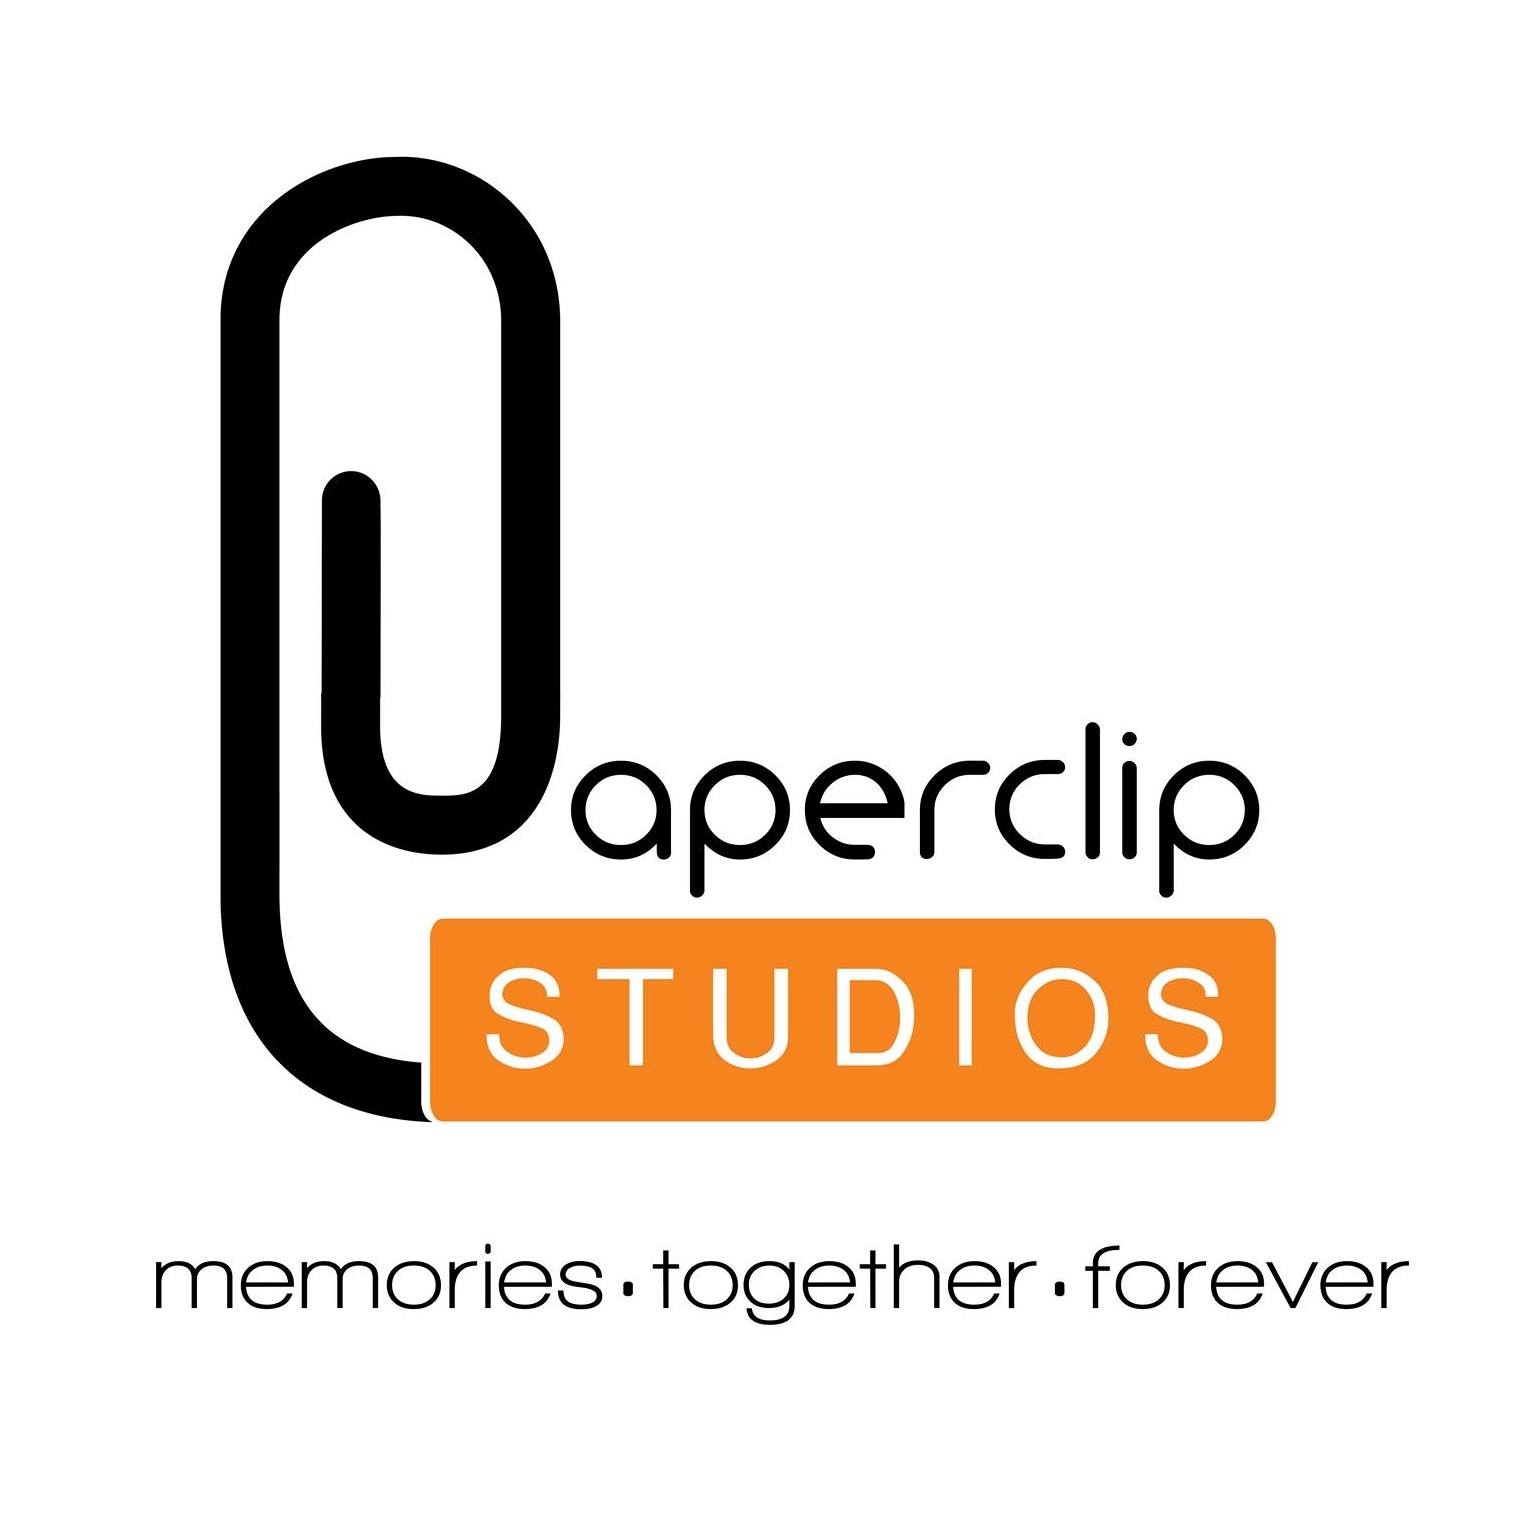 Paperclip Studios|Wedding Planner|Event Services